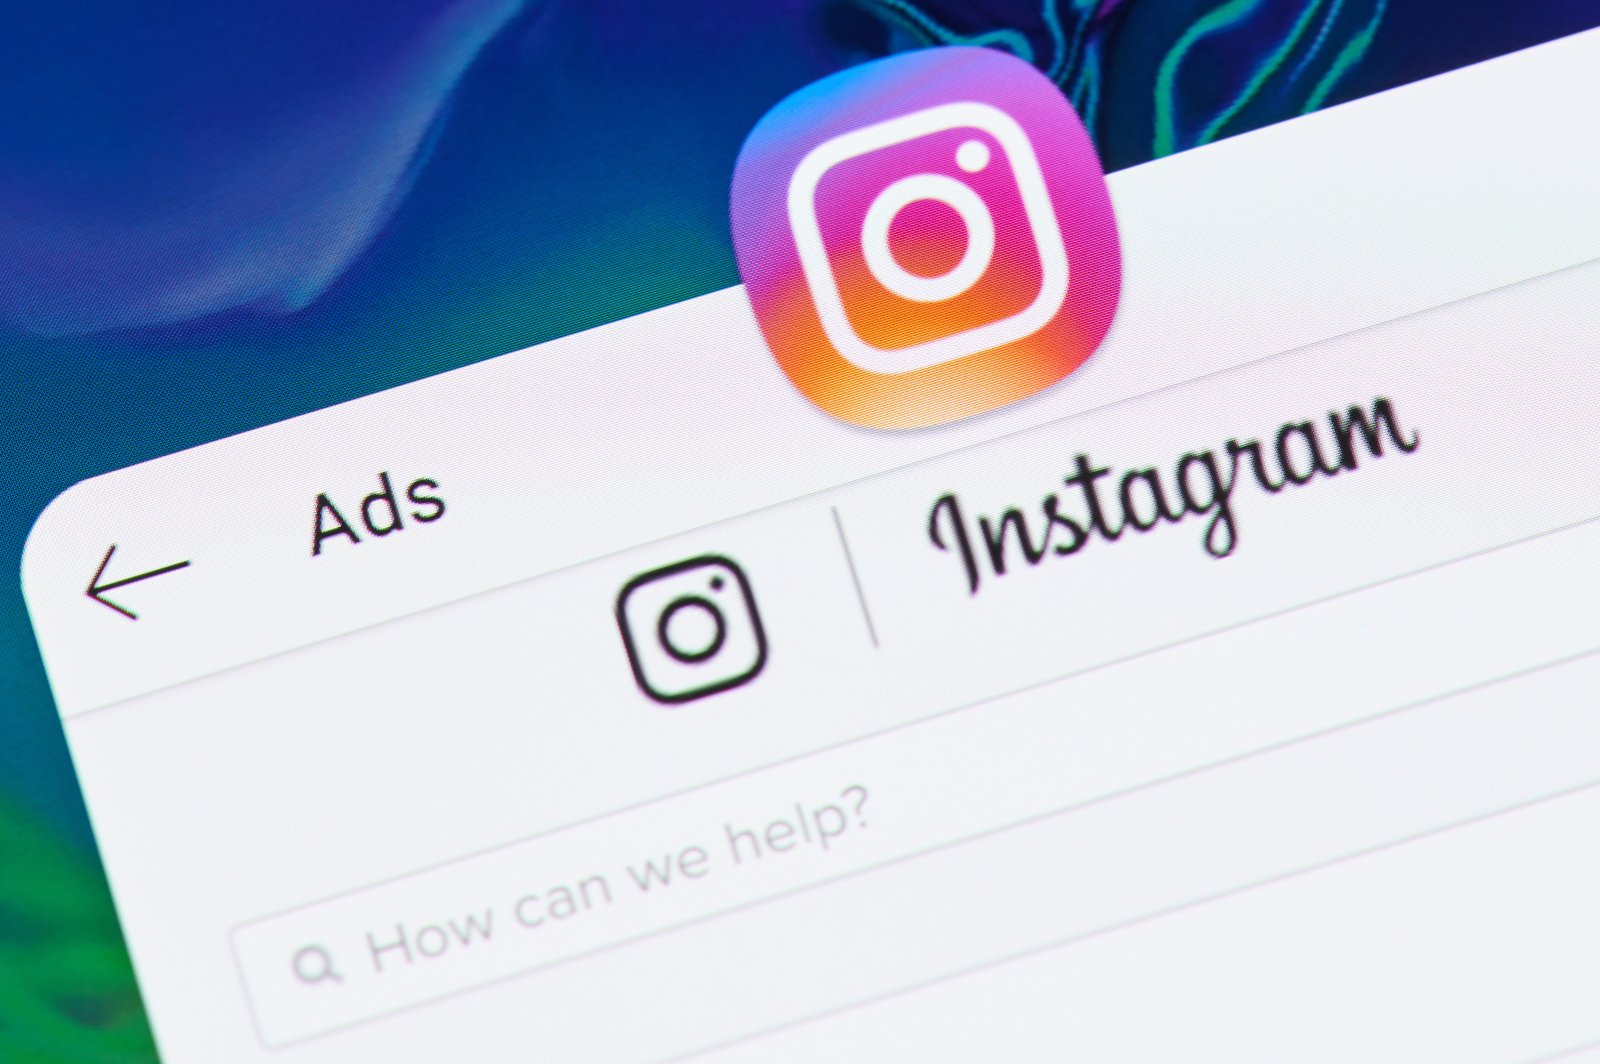 How Can You Advertise Real Estate on Instagram?